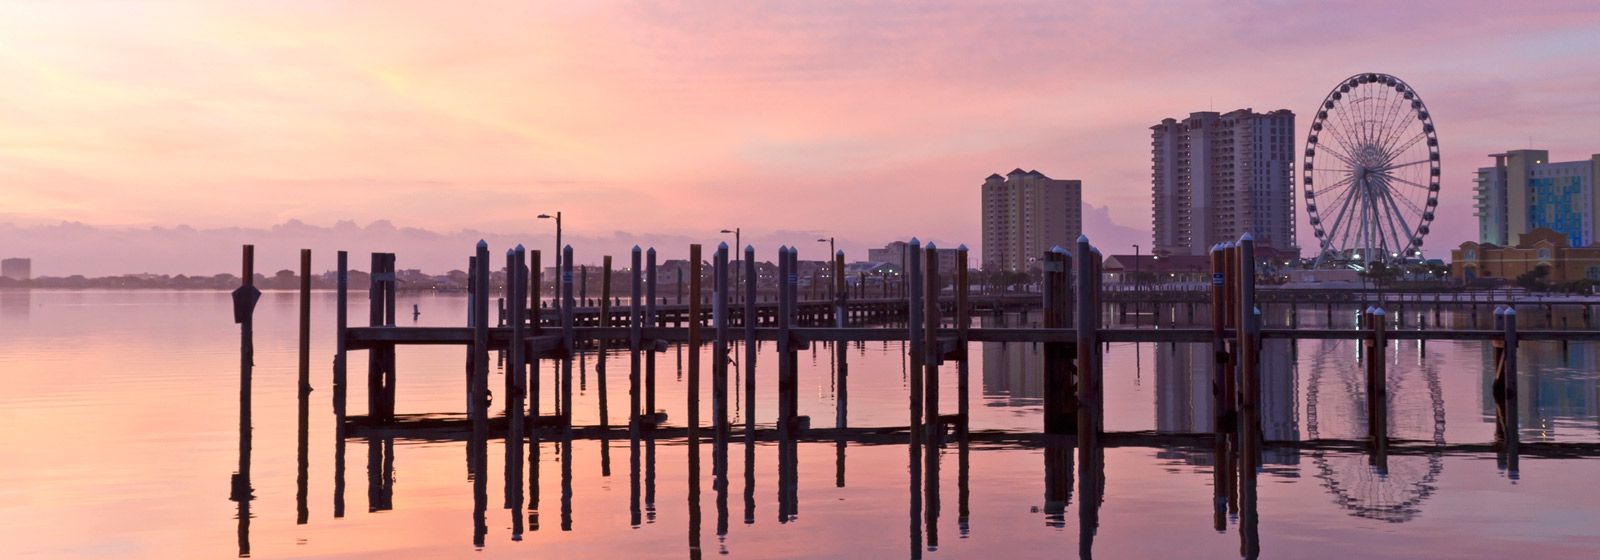 View of wooden docks in front Pensacola Beach at sunset